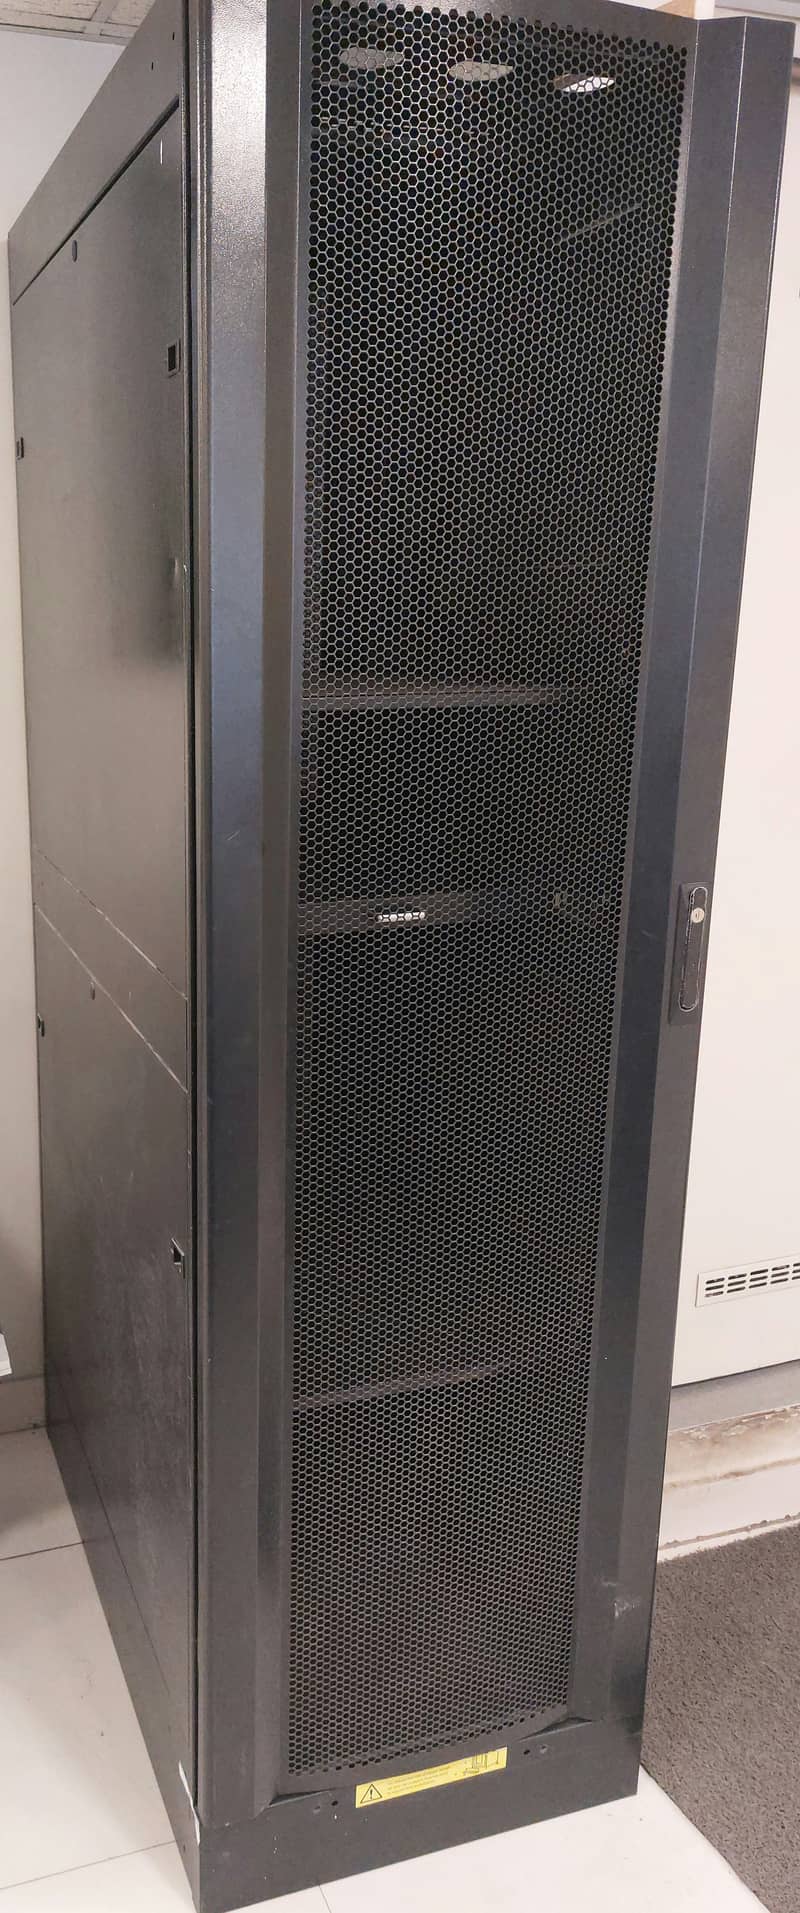 NETWORK AND SERVER RACK 1